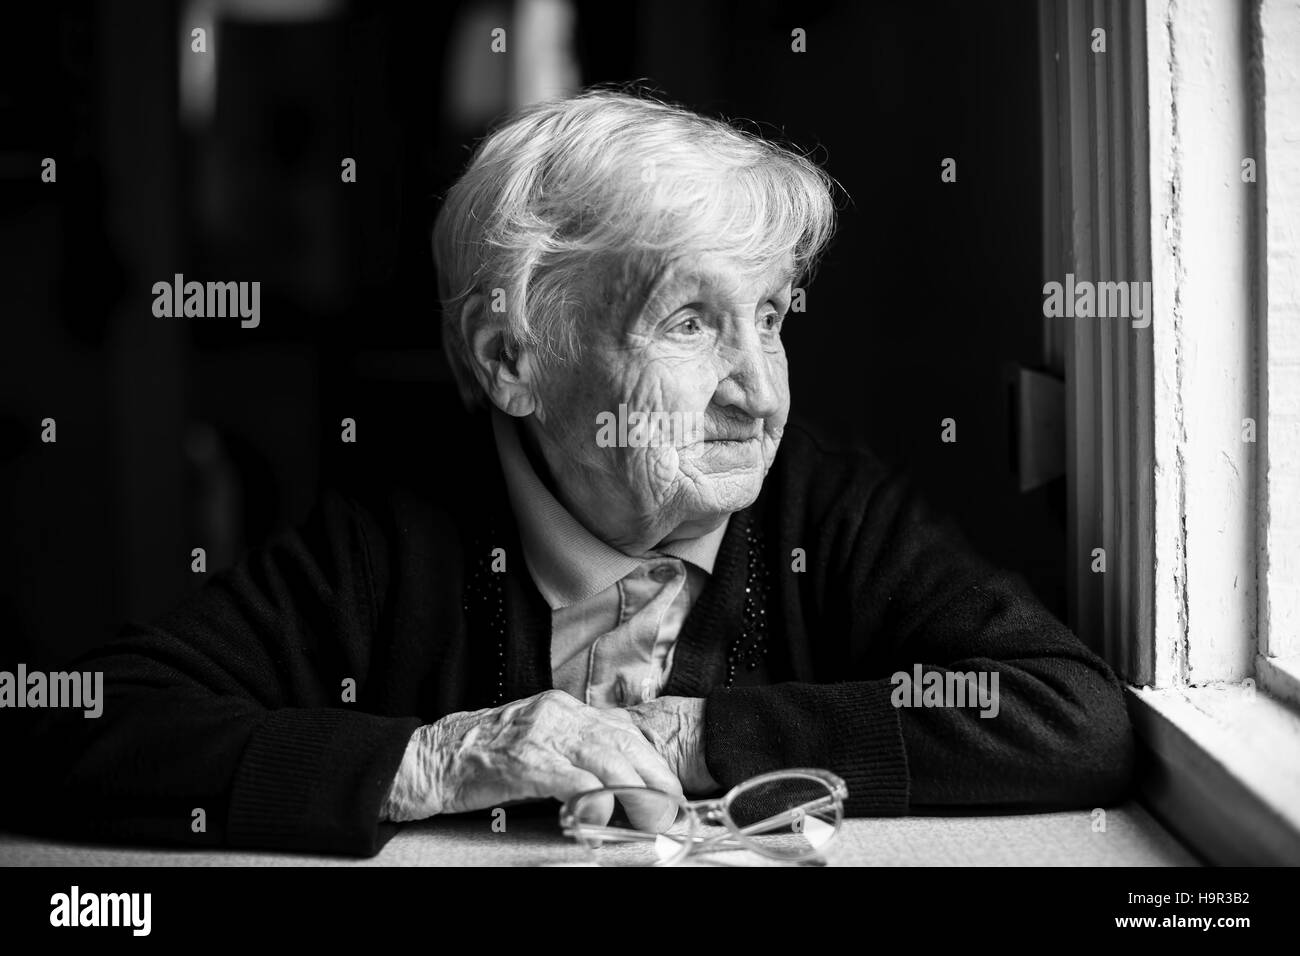 Aged woman 80-85 years, black and white photo. Stock Photo